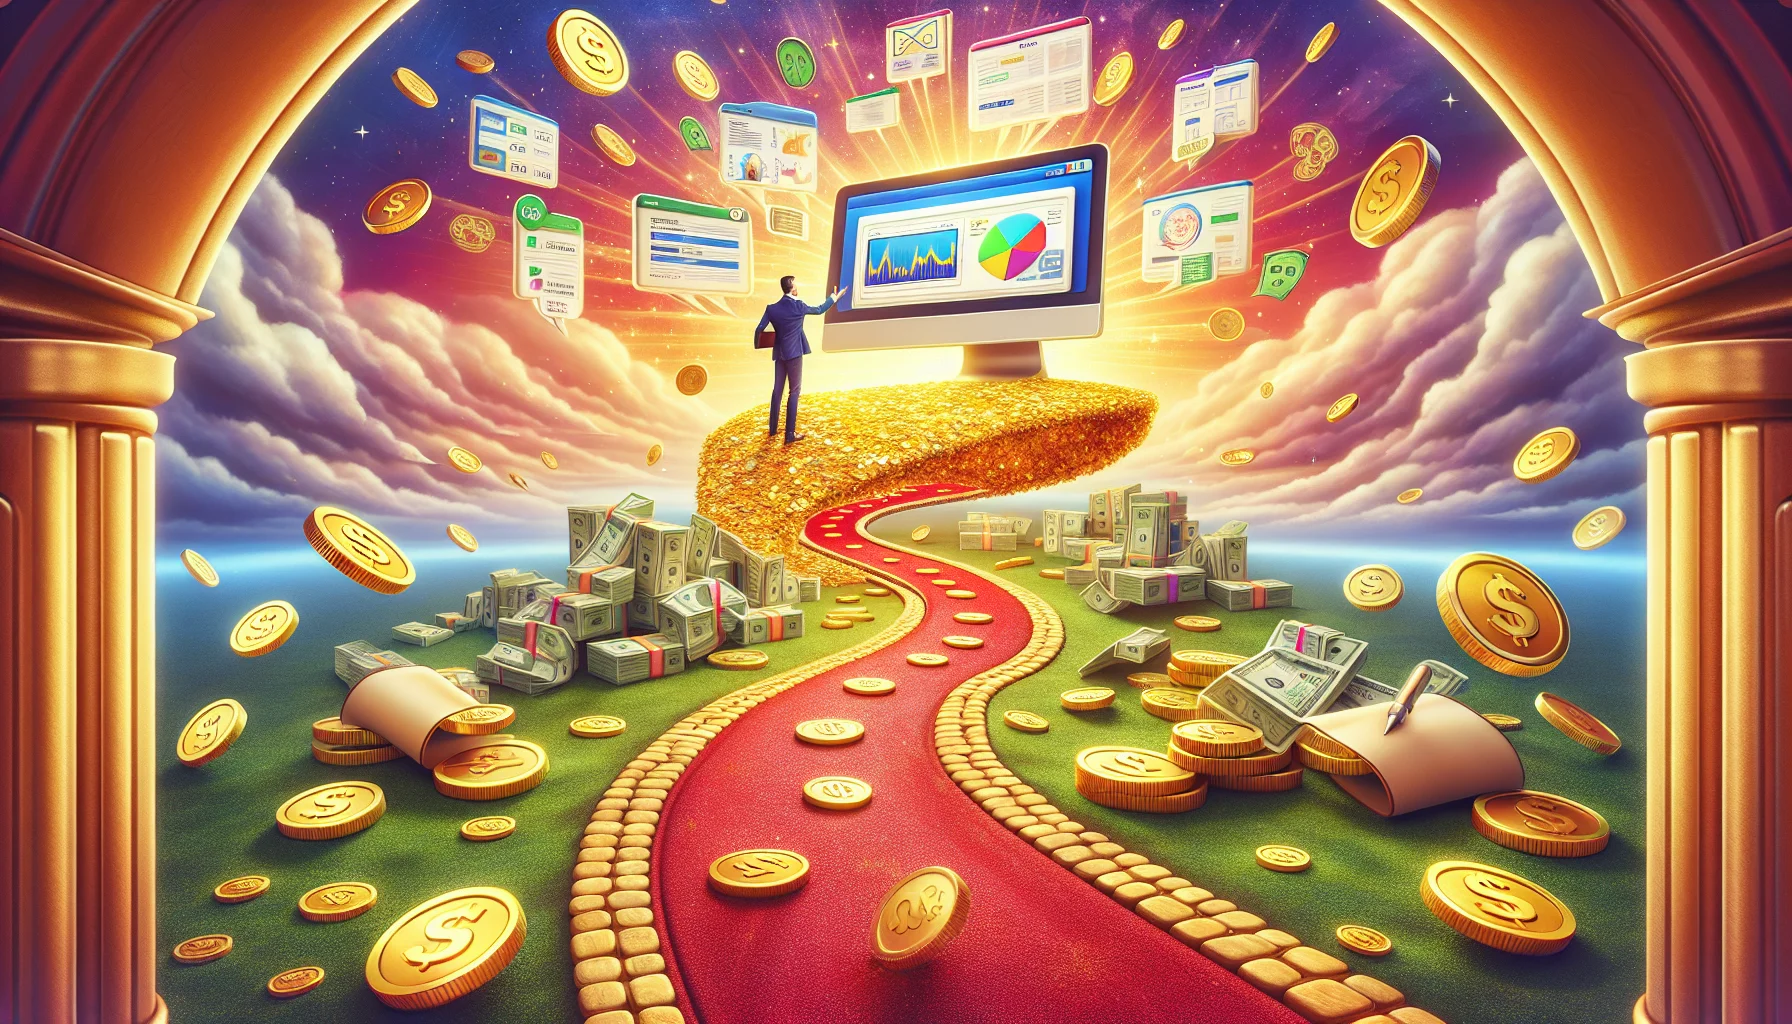 Create a humorous, realistic image that shows a scene related to making money online, using charm and persuasion. The central focus is an imaginative representation of an affiliate program; this could look like a enticing path paved with gold coins leading to a giant computer. The computer itself could have pop-ups depicting diagrams, lucrative deals and exciting offers, while online money transactions are shown as a visible stream of digital cash flowing into a wallet. All elements are encased in vibrant colors and light, emphasizing excitement and anticipation.